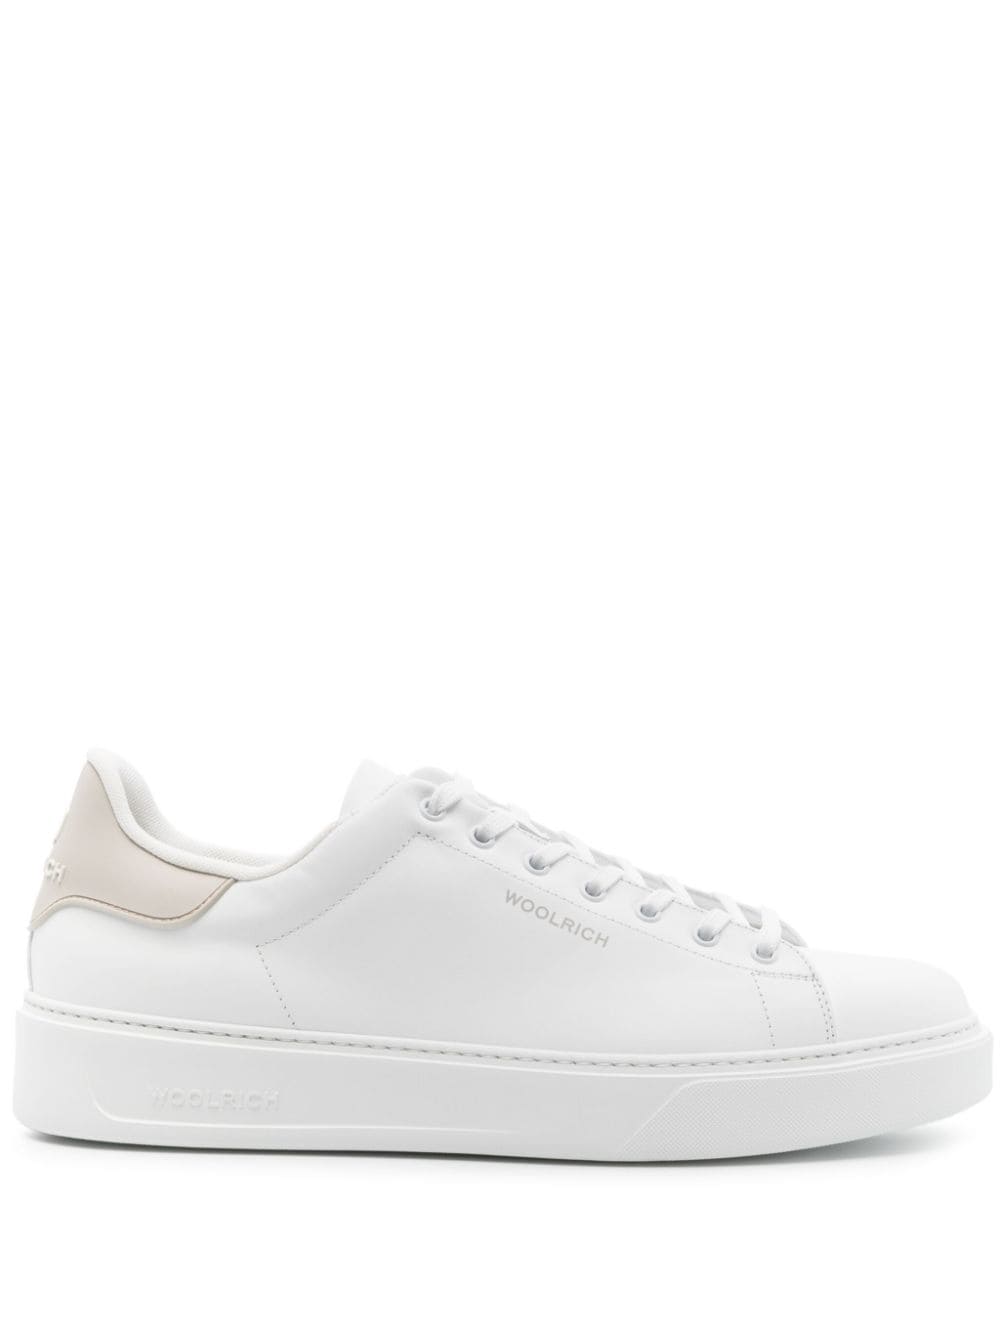 Woolrich lace-up leather sneakers - Weiß von Woolrich